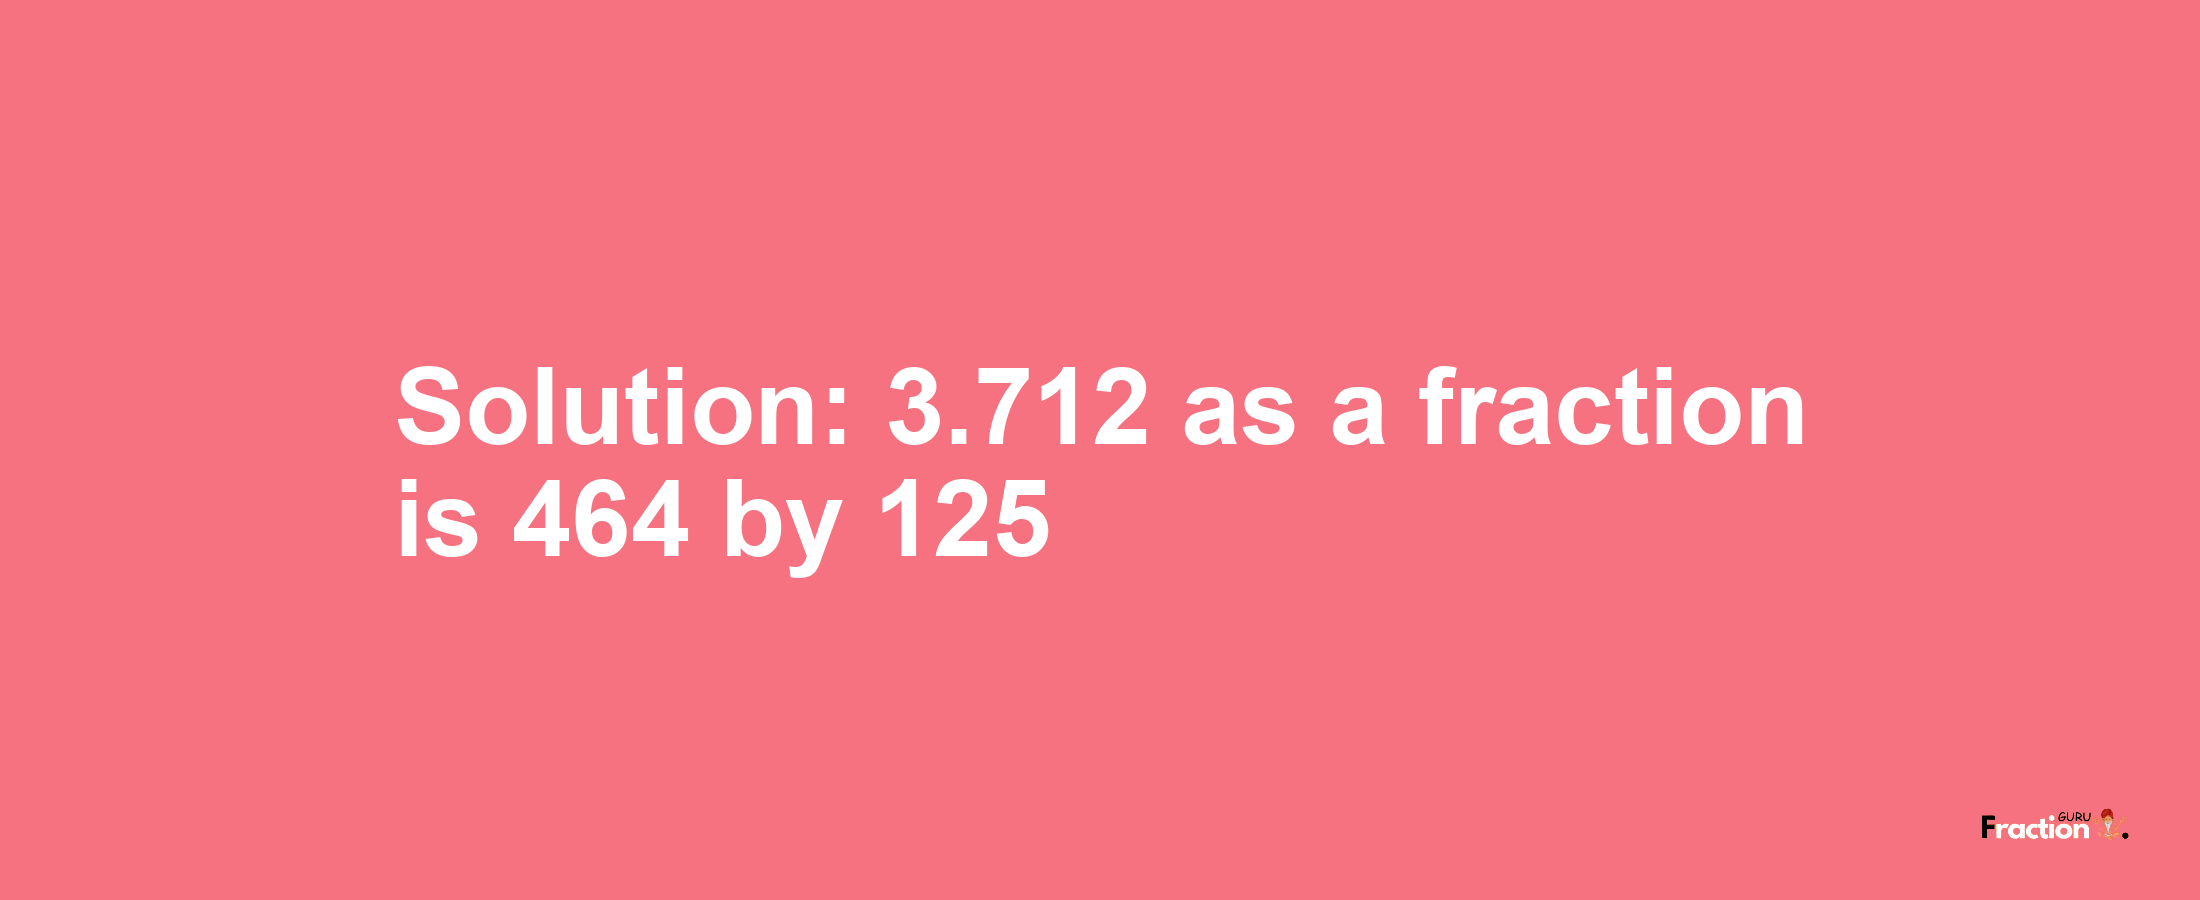 Solution:3.712 as a fraction is 464/125